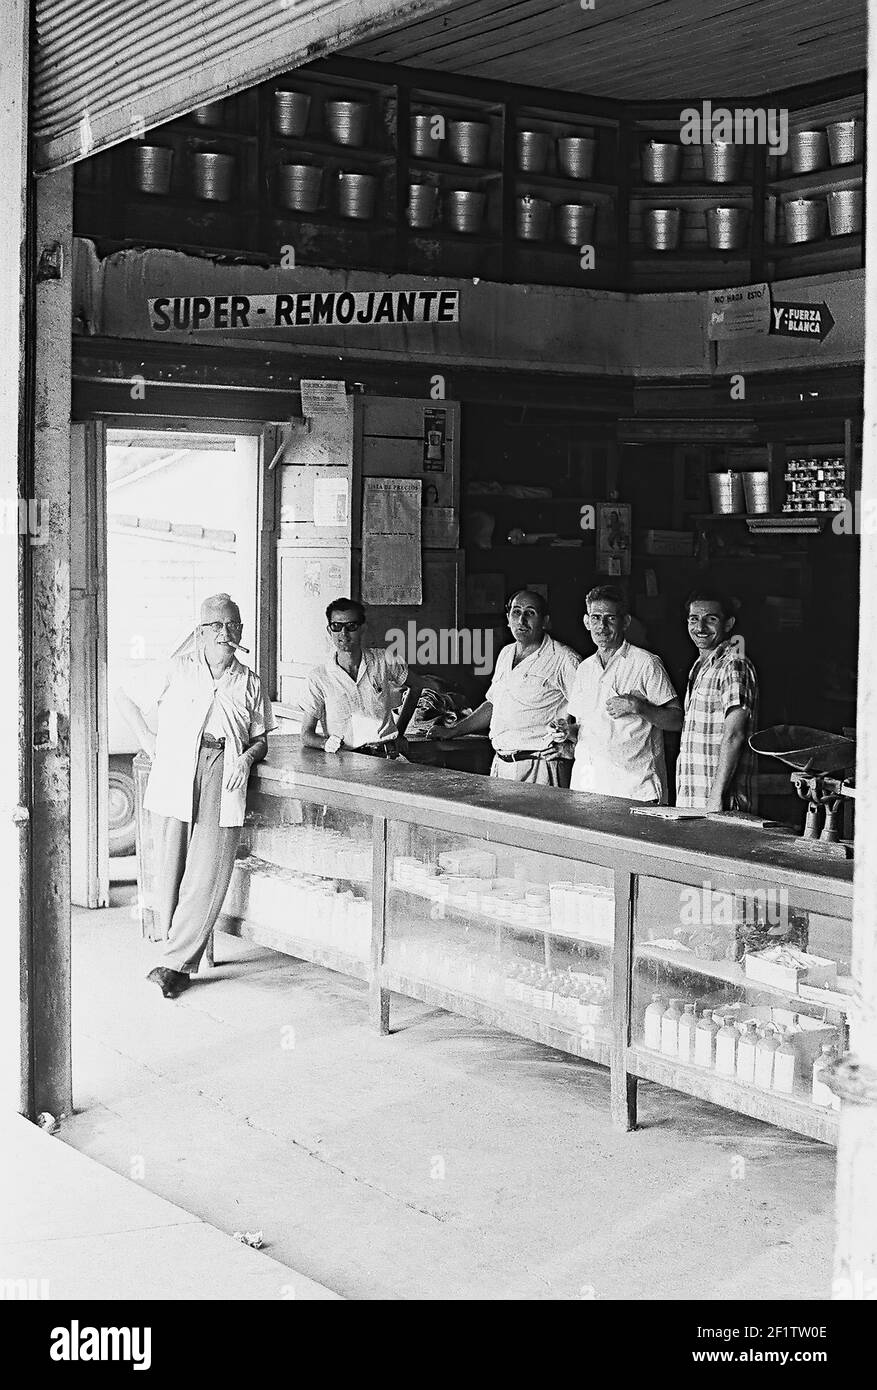 Tobacco cooperative store, Cuba, Pinar del Rio (Cuba : Province), 1964. From the Deena Stryker photographs collection. () Stock Photo